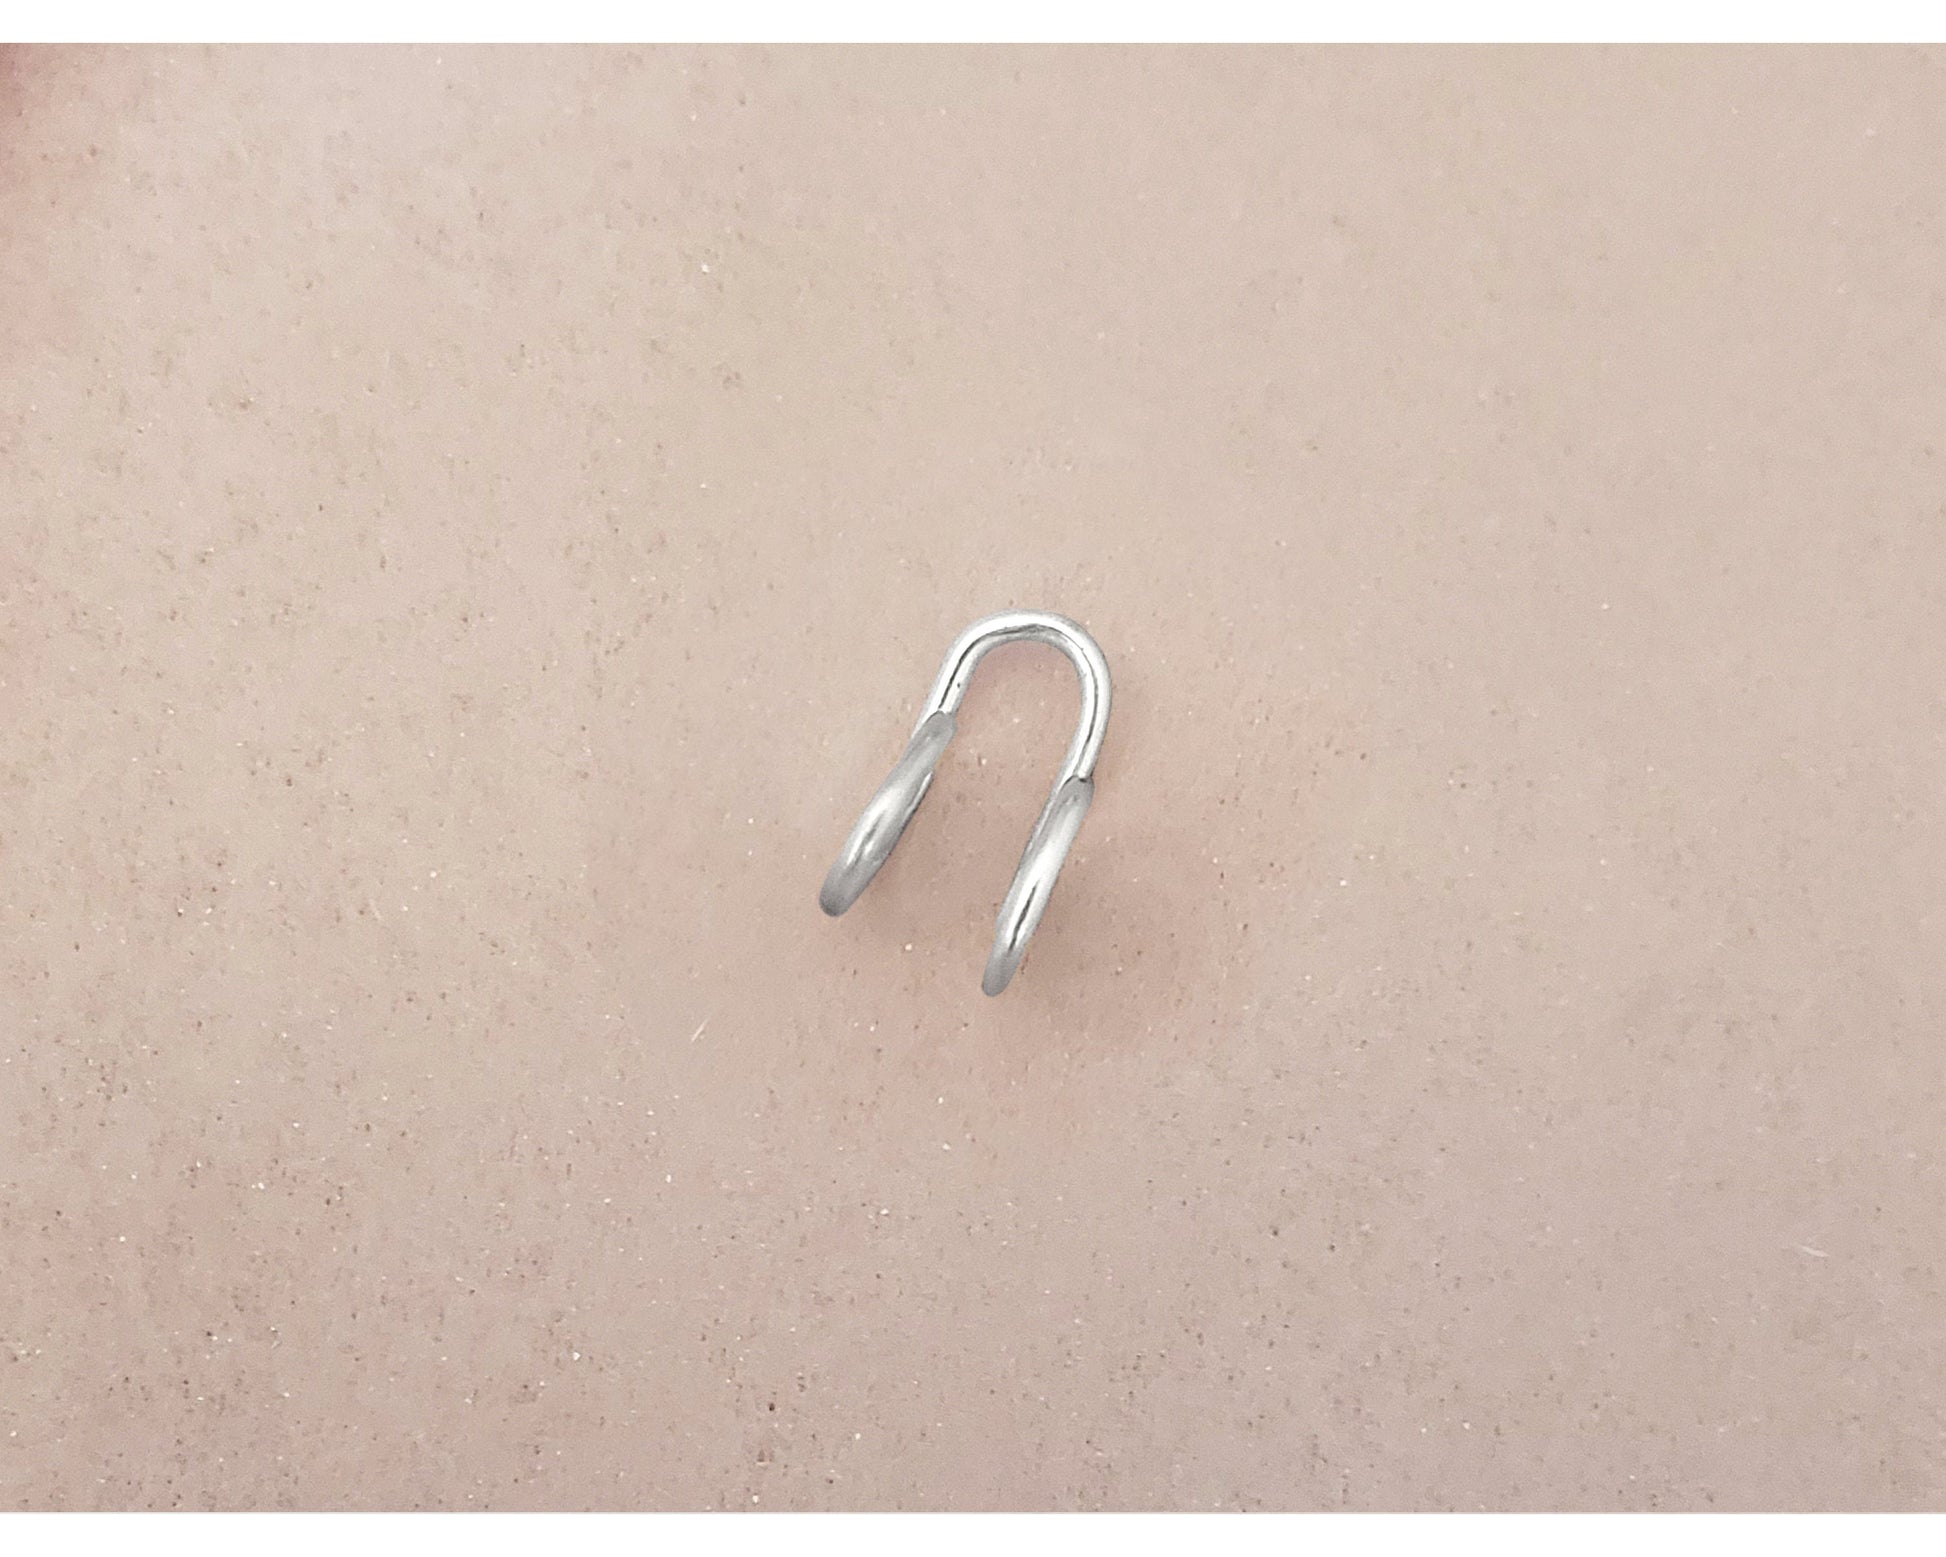 Ear Tragus or Nose Side Cuff, Single Spiral, Reversible, Adjustable, Simple, Minimalist, Unisex, Boho, Beach, Choice of Colors and Metals